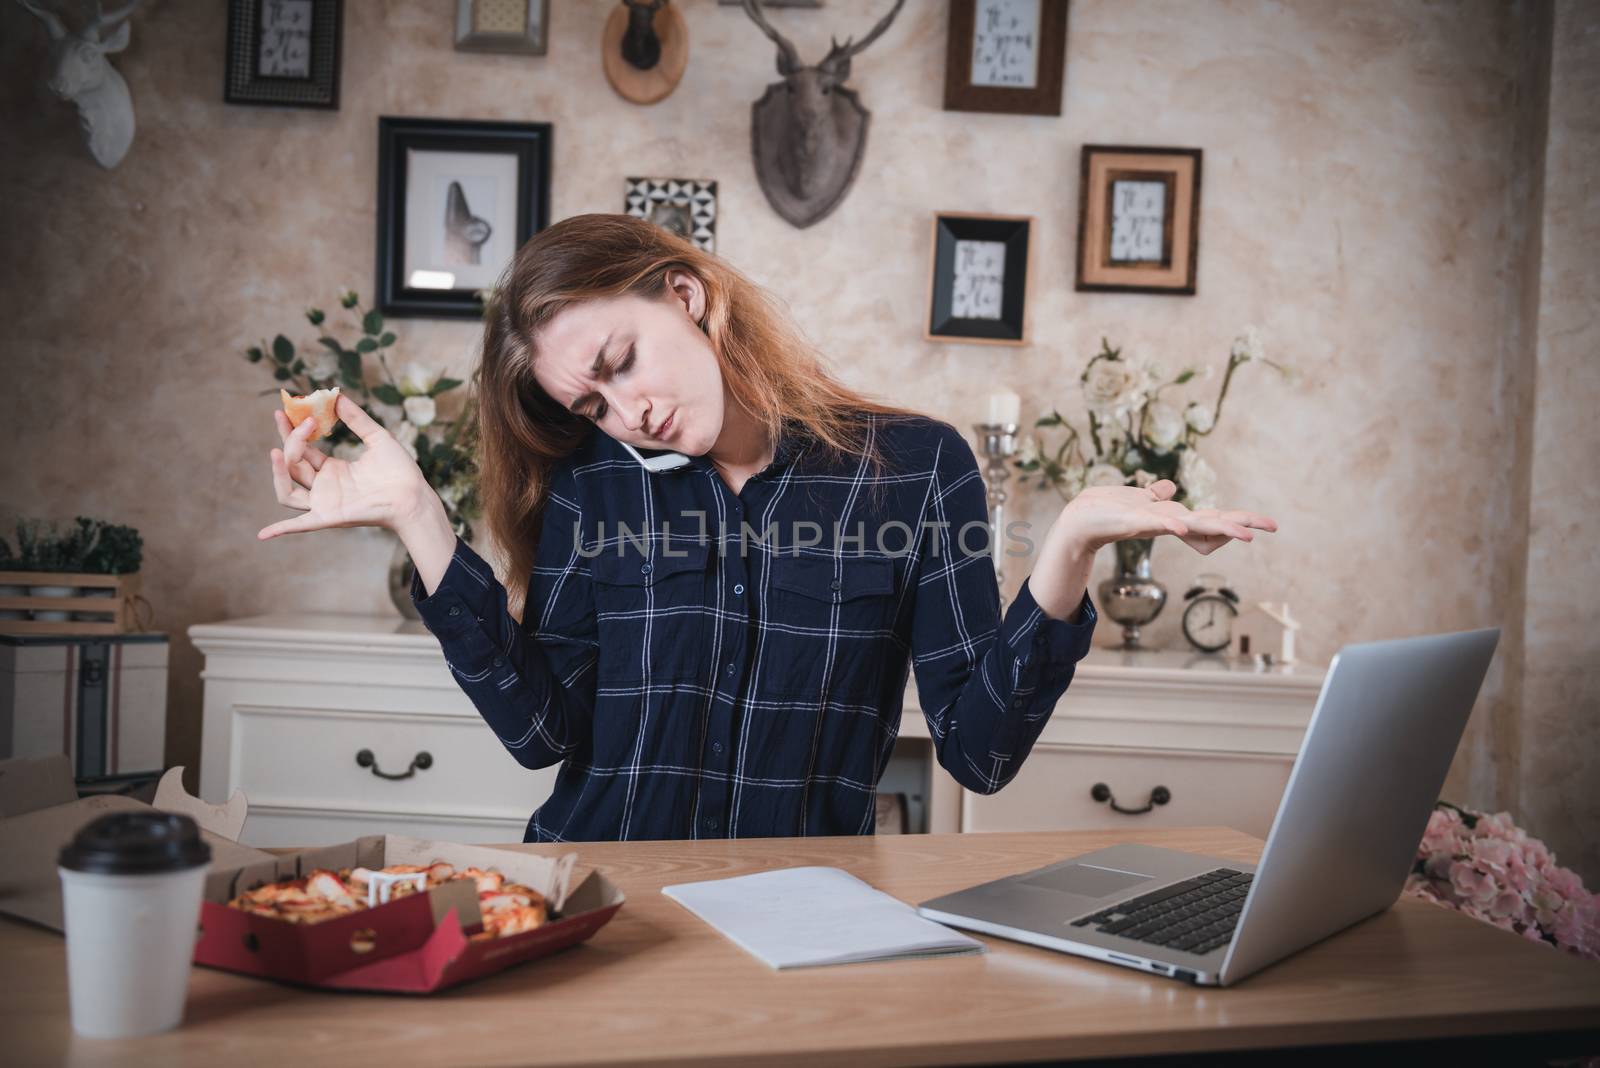 Busy Businesswoman Working at Home While Using Mobile Phone at The Same Time She Eating, Business Woman Entrepreneur Work From Home With Serious Communicating and Busy Tasking. Multitasking Lifestyles by MahaHeang245789